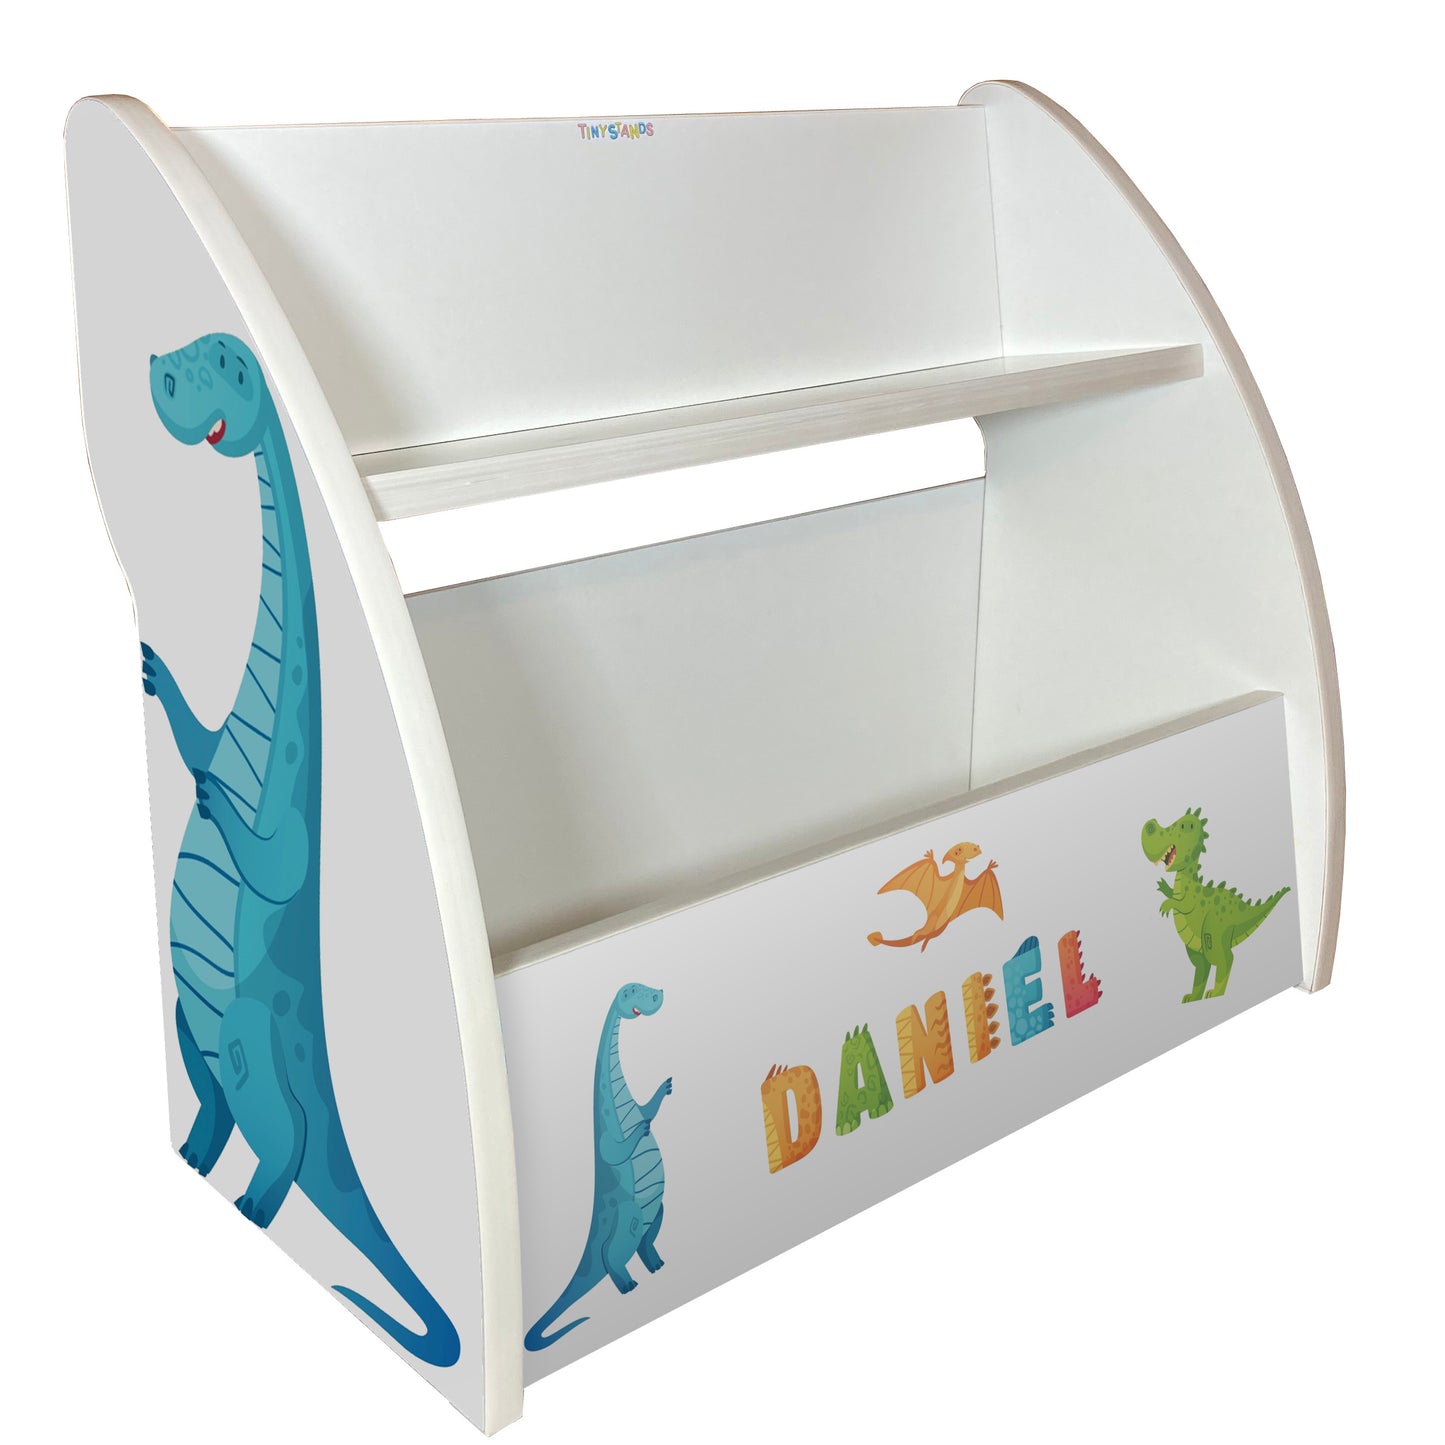 Dinosaurs (white) Toys Stand